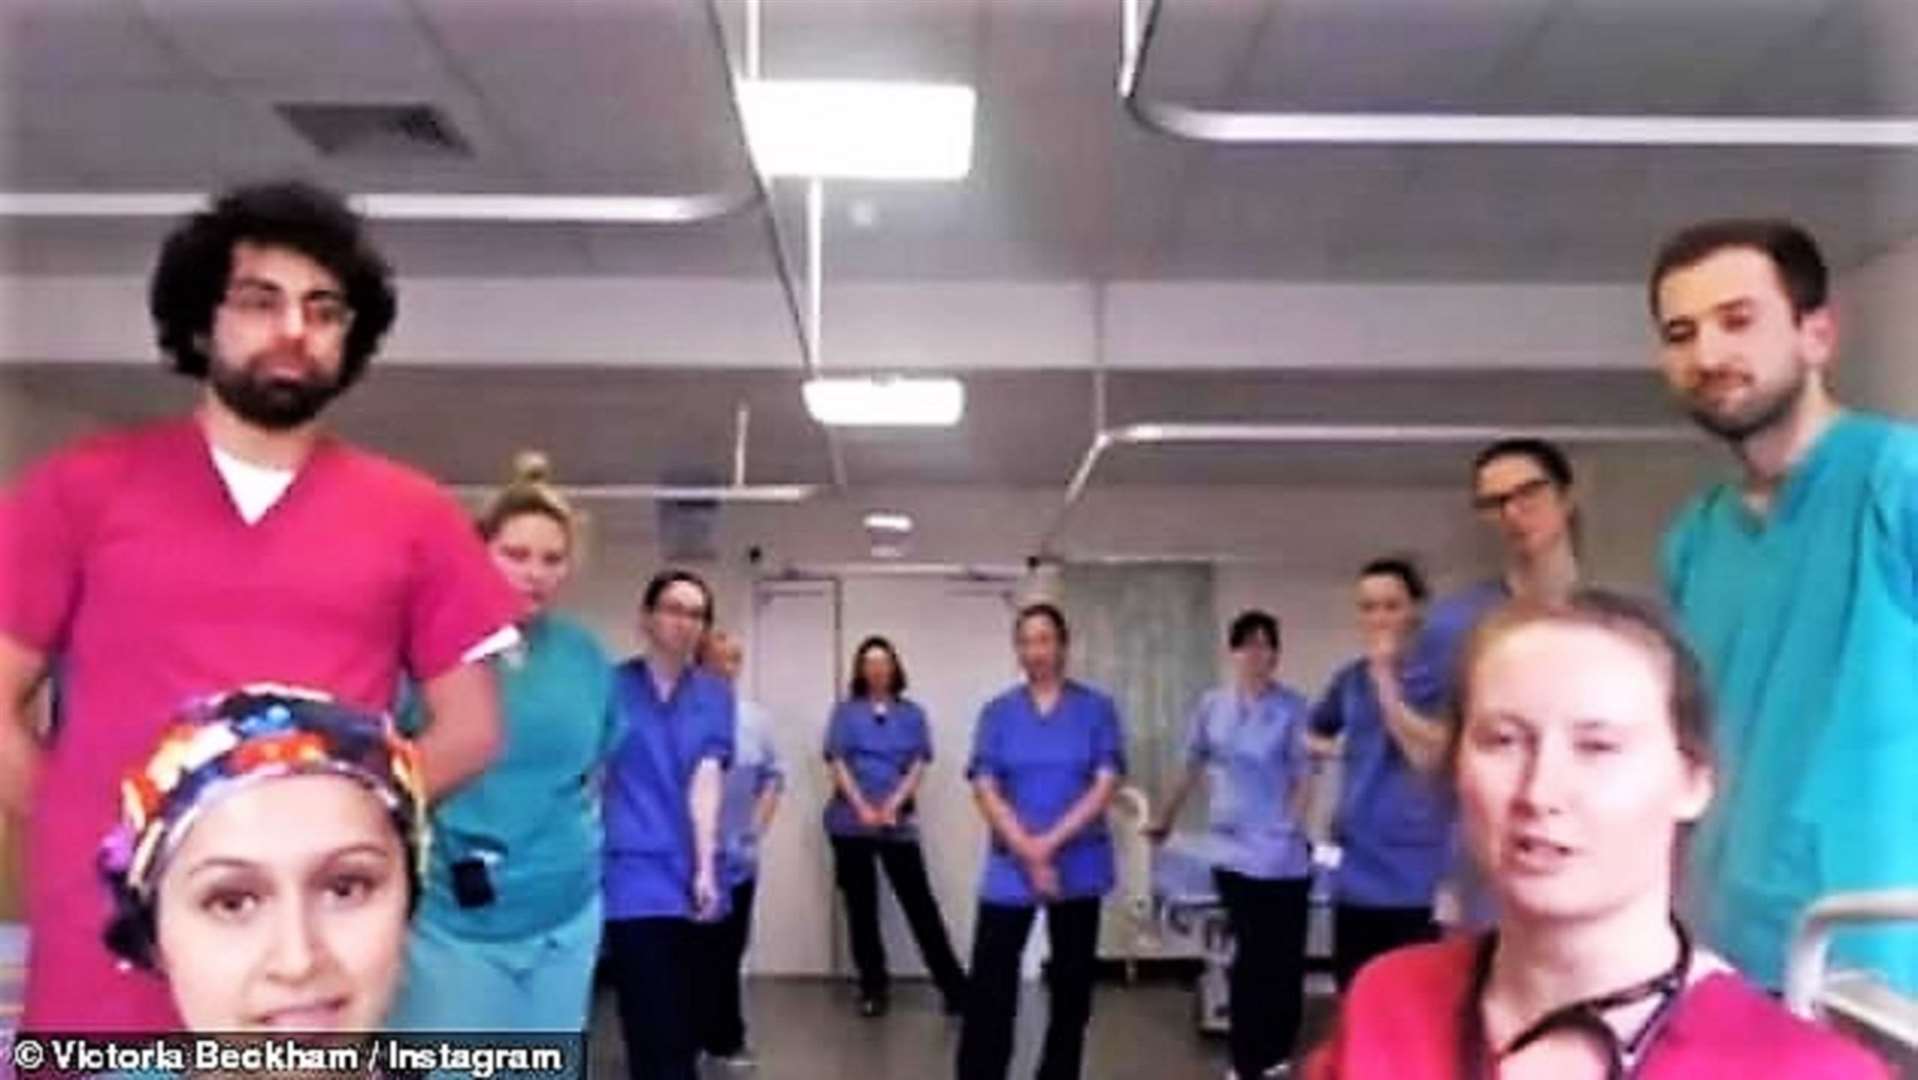 A snapshot of the Caithness General Hospital staff taken during the video link which was aired on Instagram. Dr Hina Jamall can be seen front left.